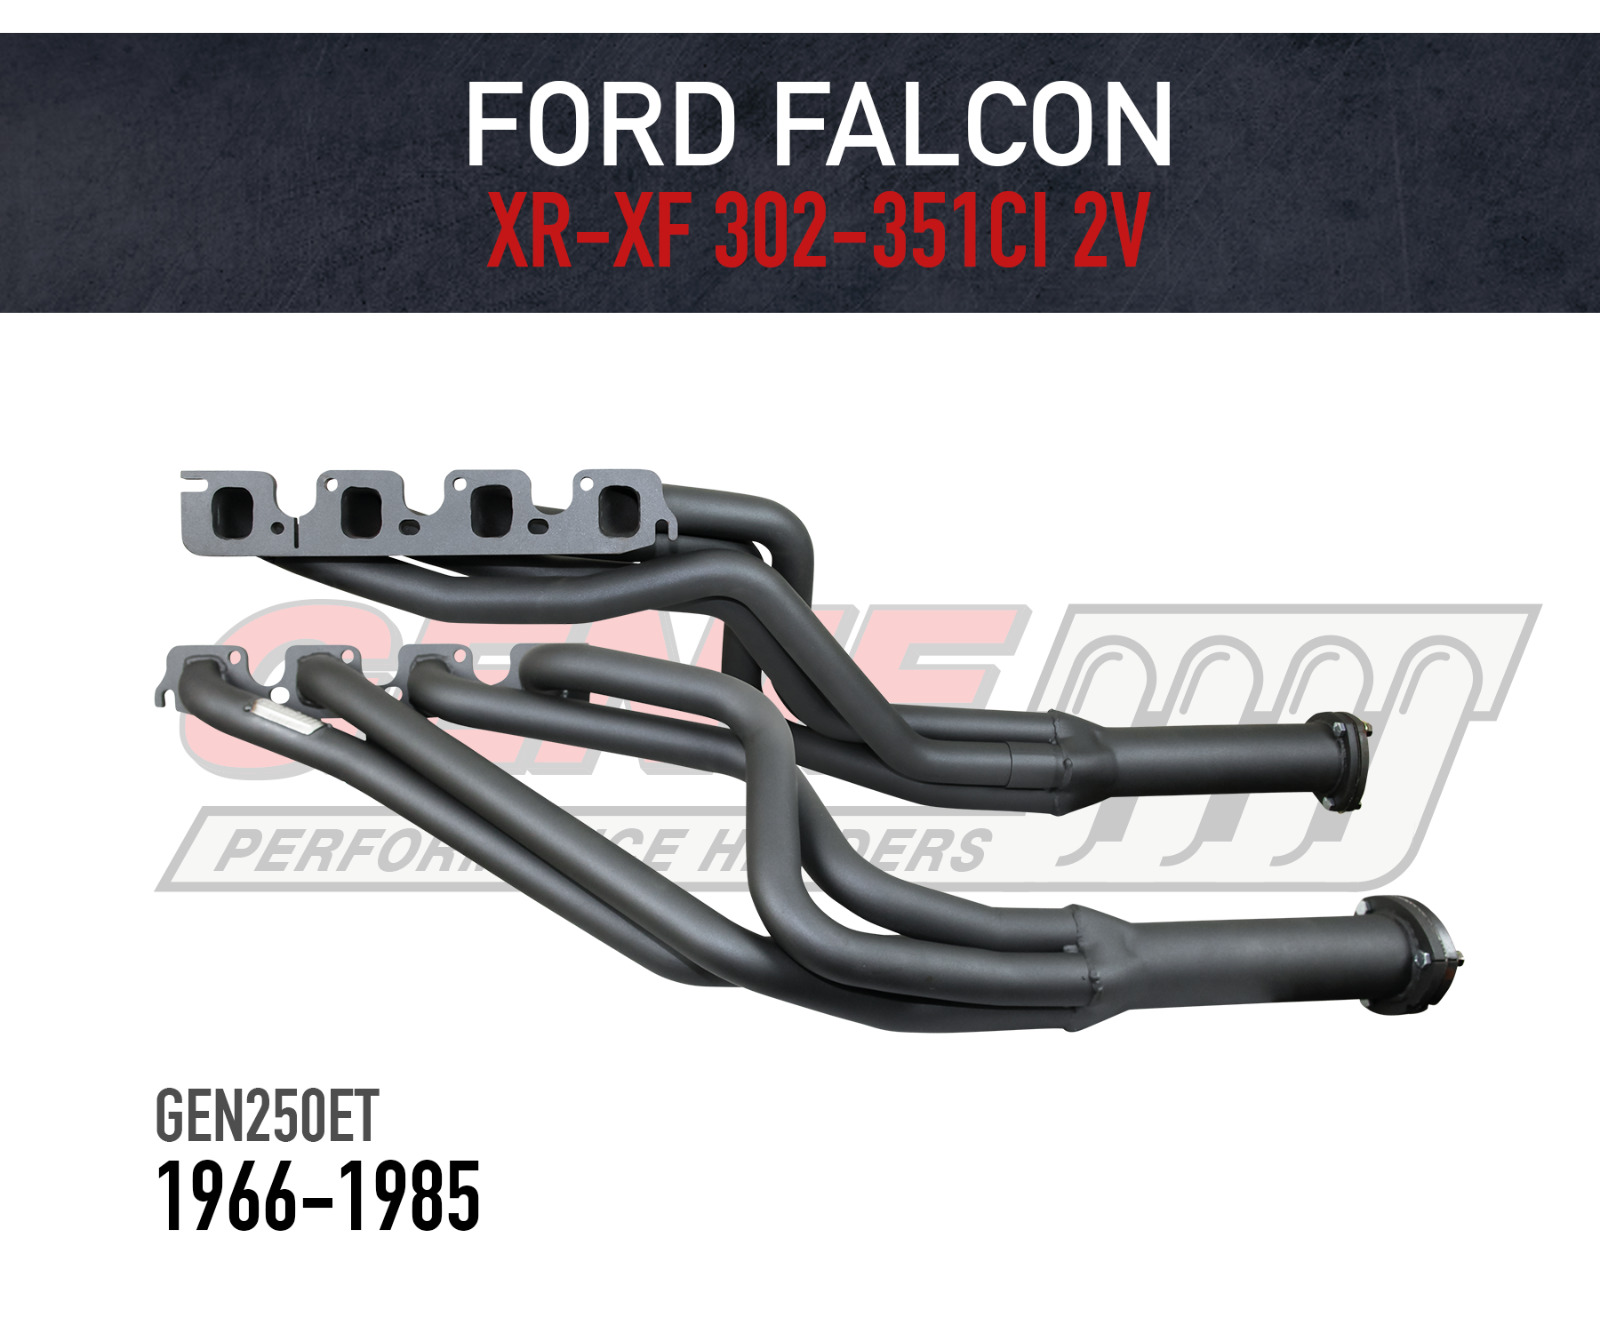 Genie Headers / Extractors to suit Ford Falcon XR-XF V8 2V Heads - Tuned Length